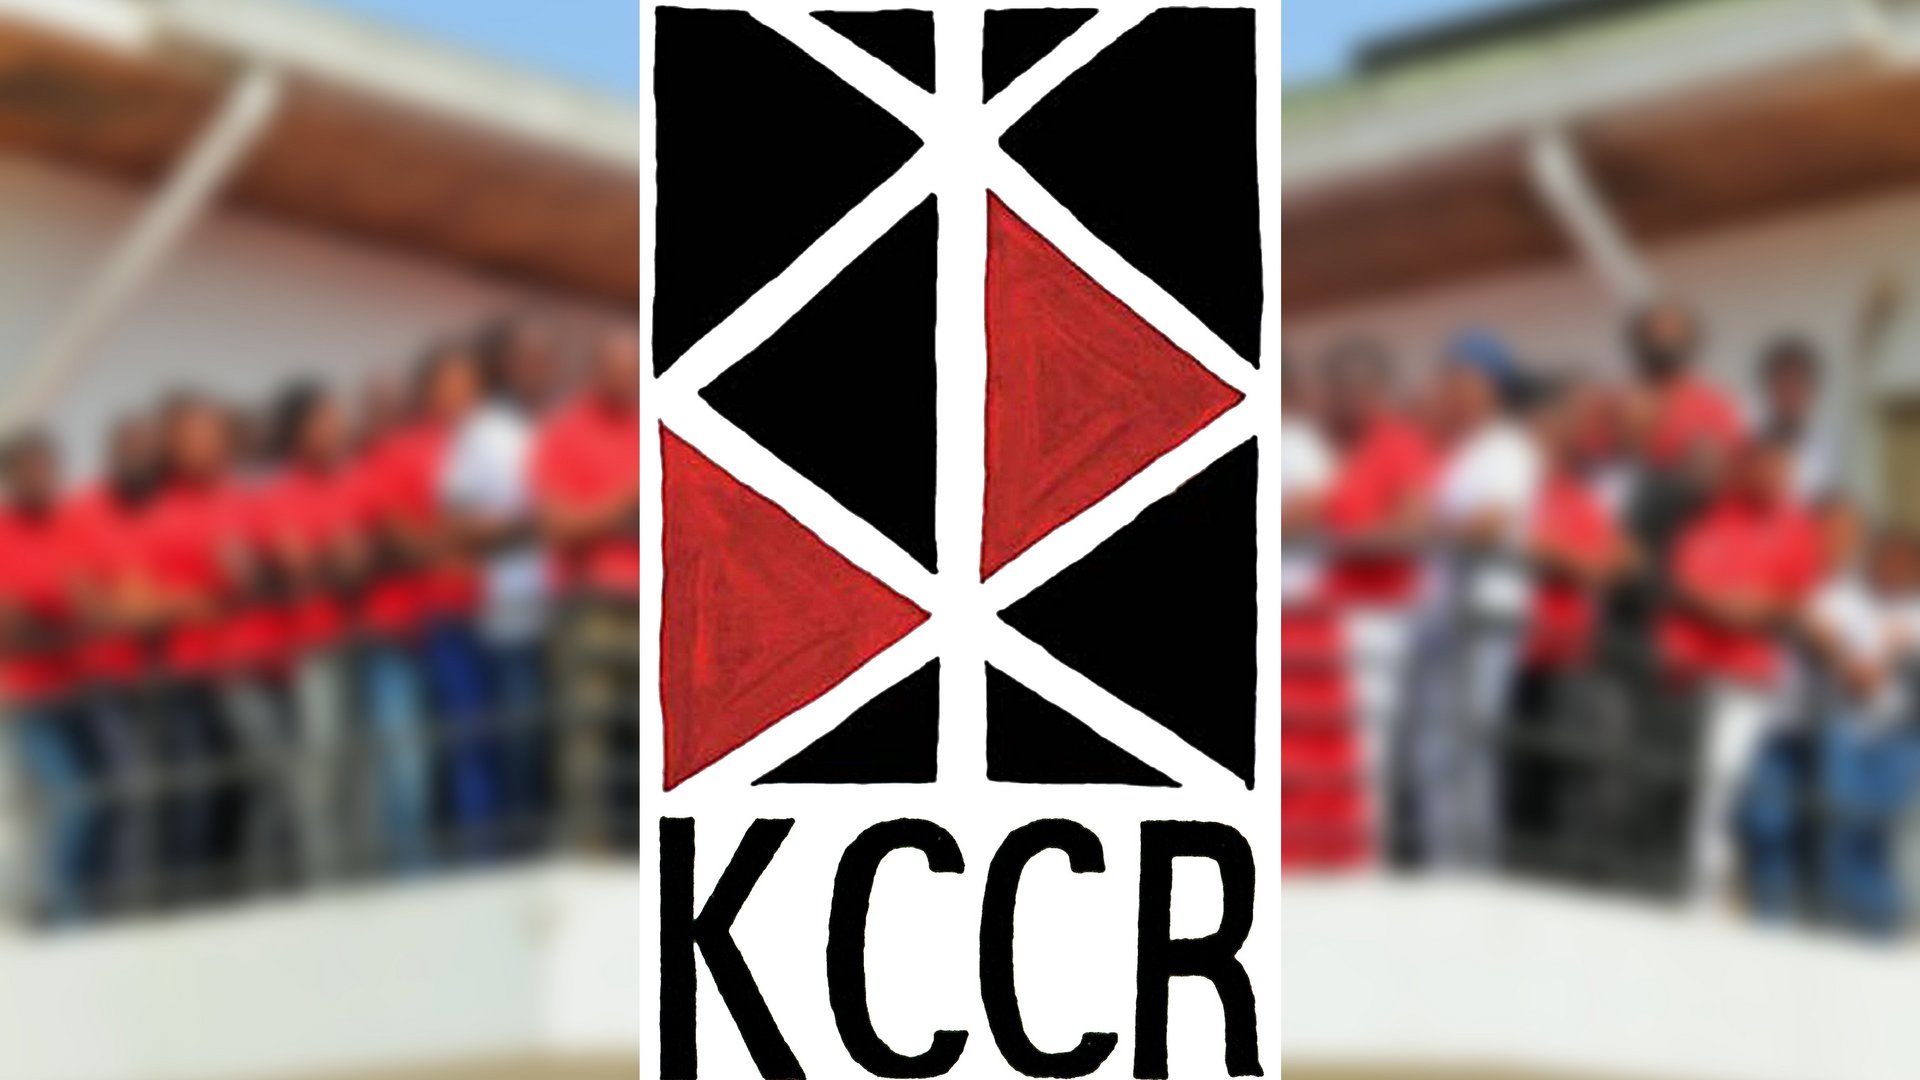 The picture shows the red and black logo of the KCCR, with the Institute's staff blurred behind it on the Institute's balcony.